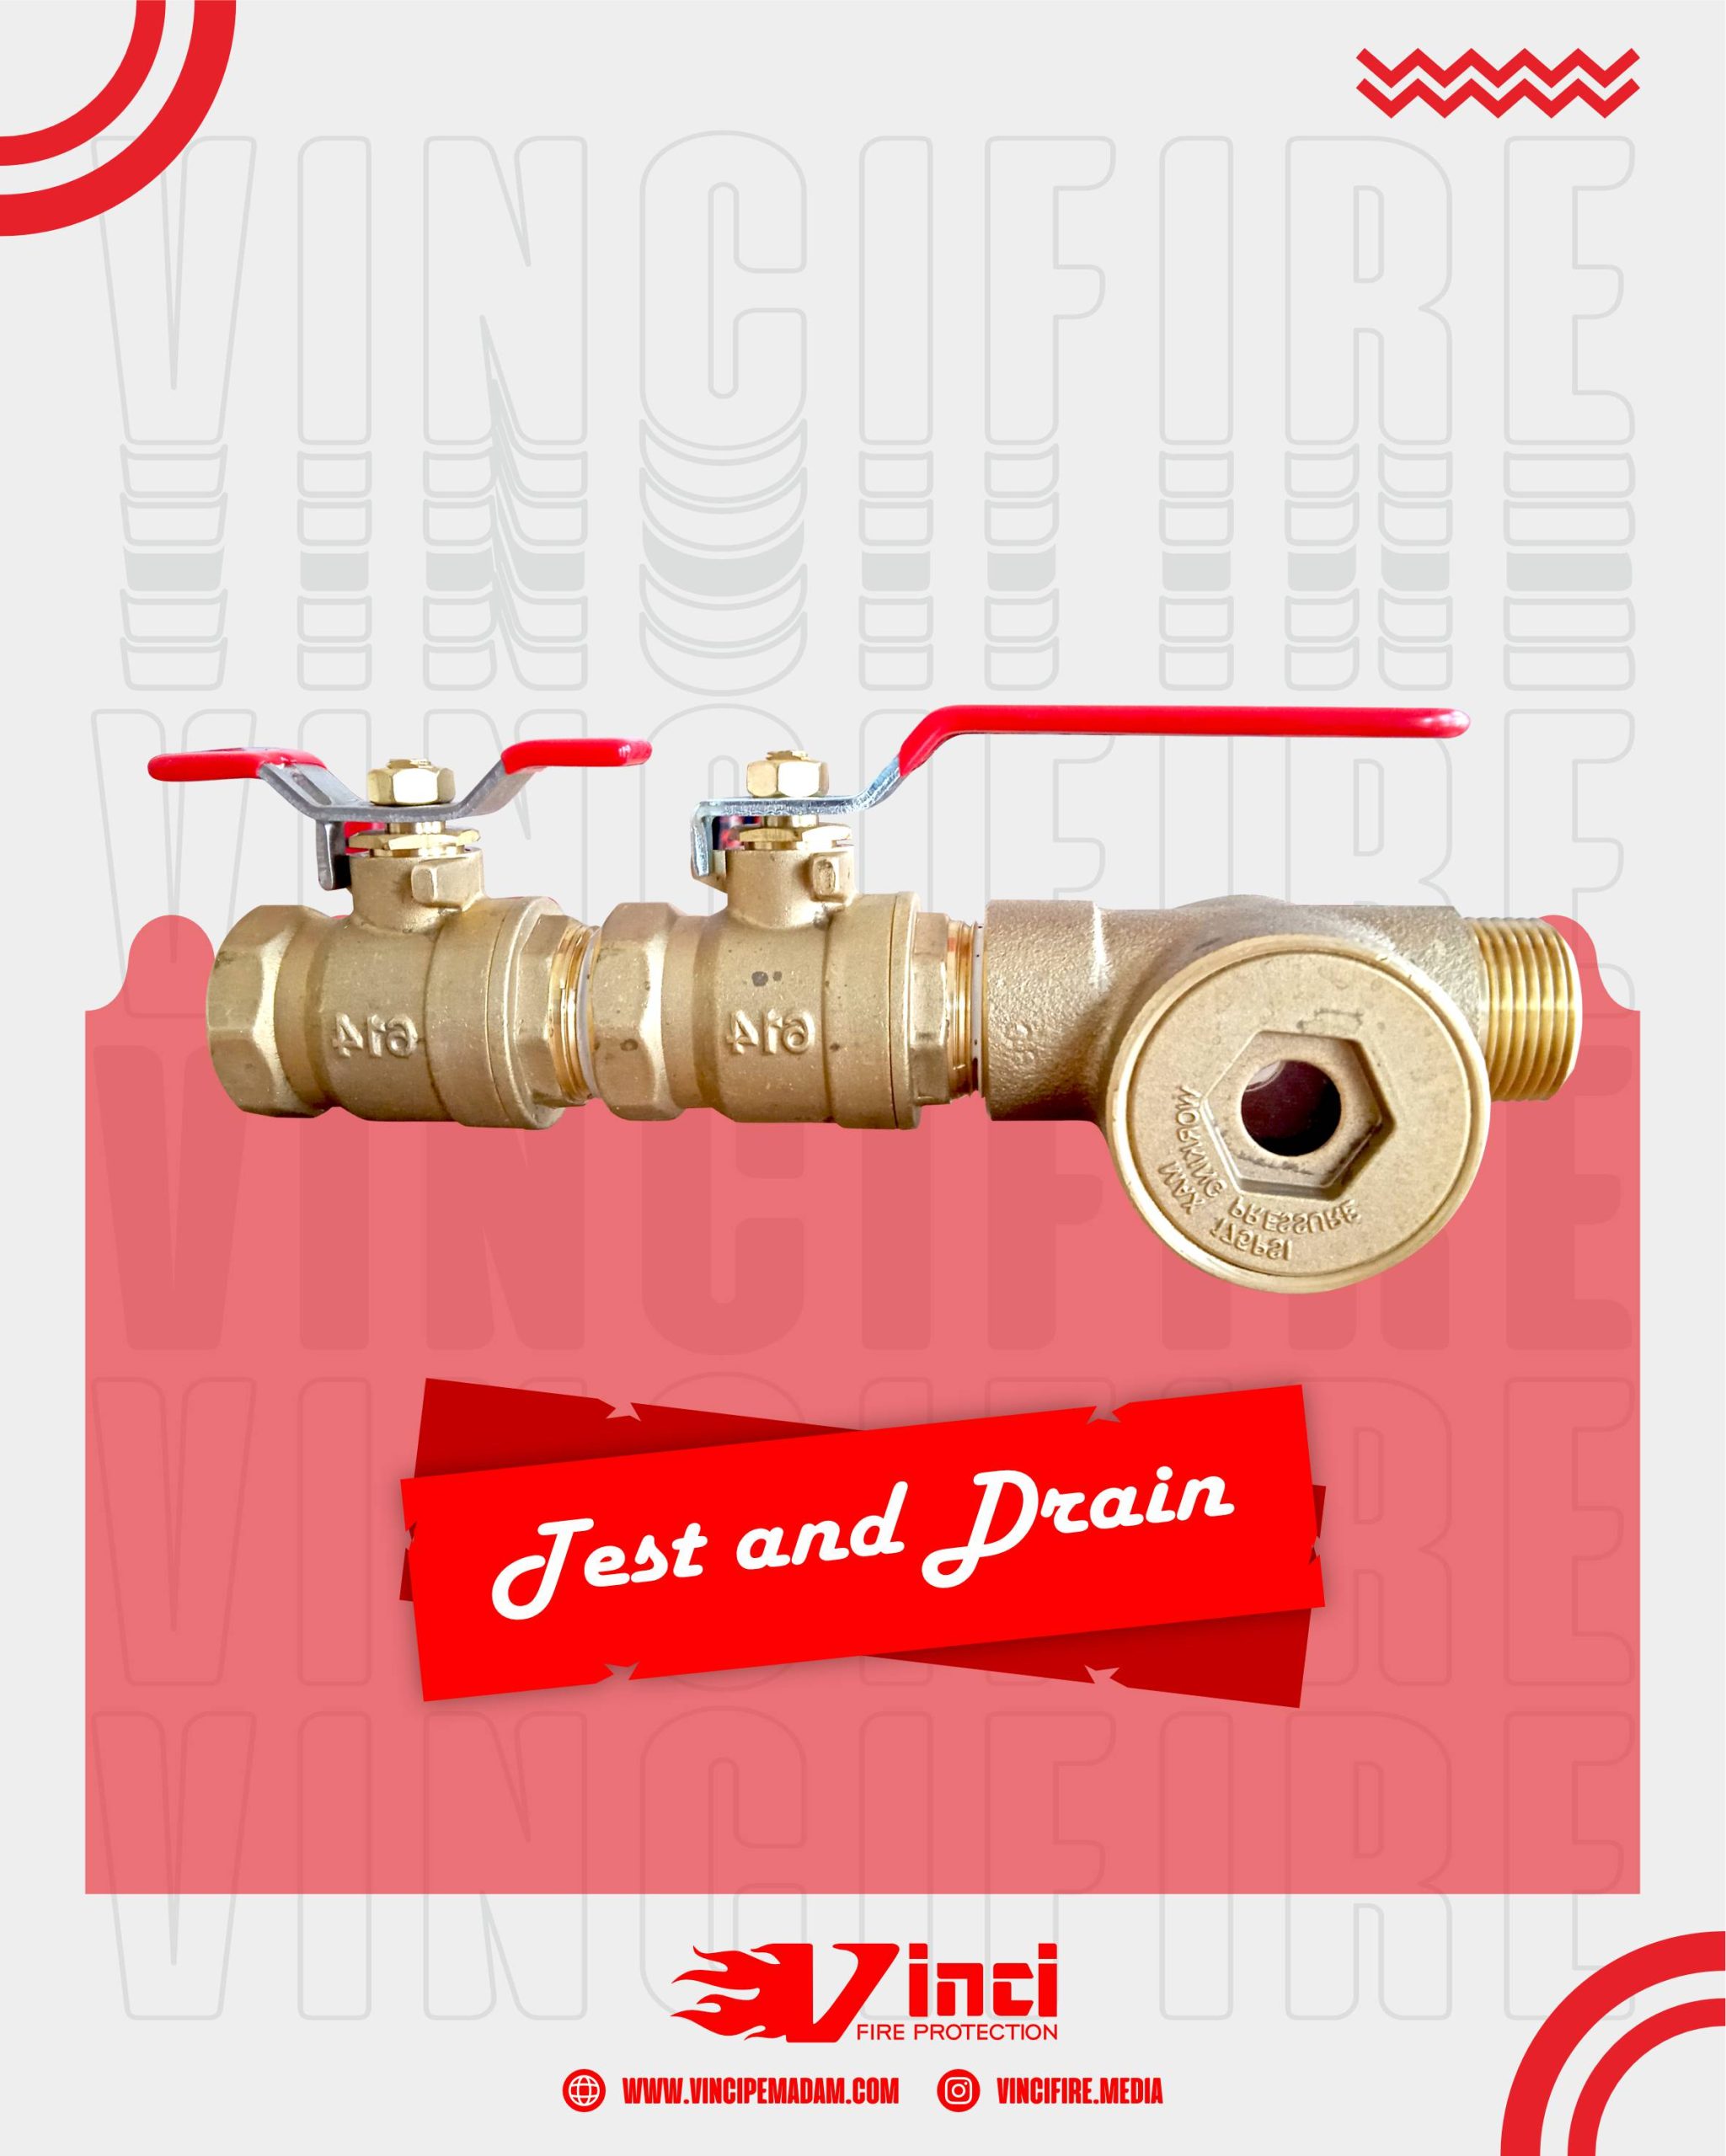 Test and Drain